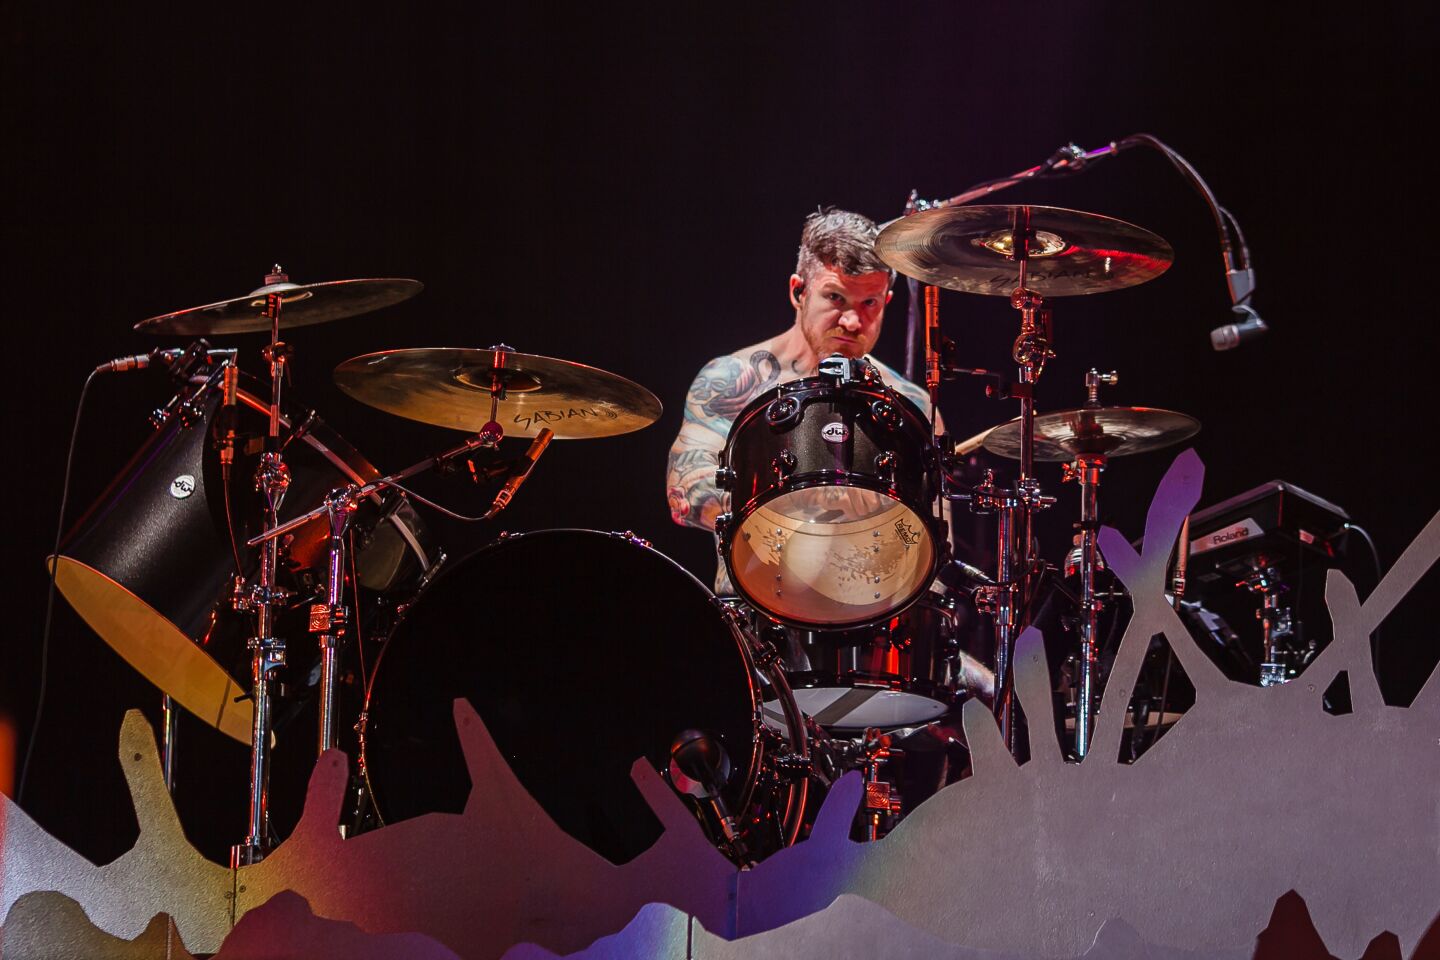 Drummer Andrew John Hurley of Fall Out Boy during the Hella Mega Tour in downtown San Diego on August 29, 2021.